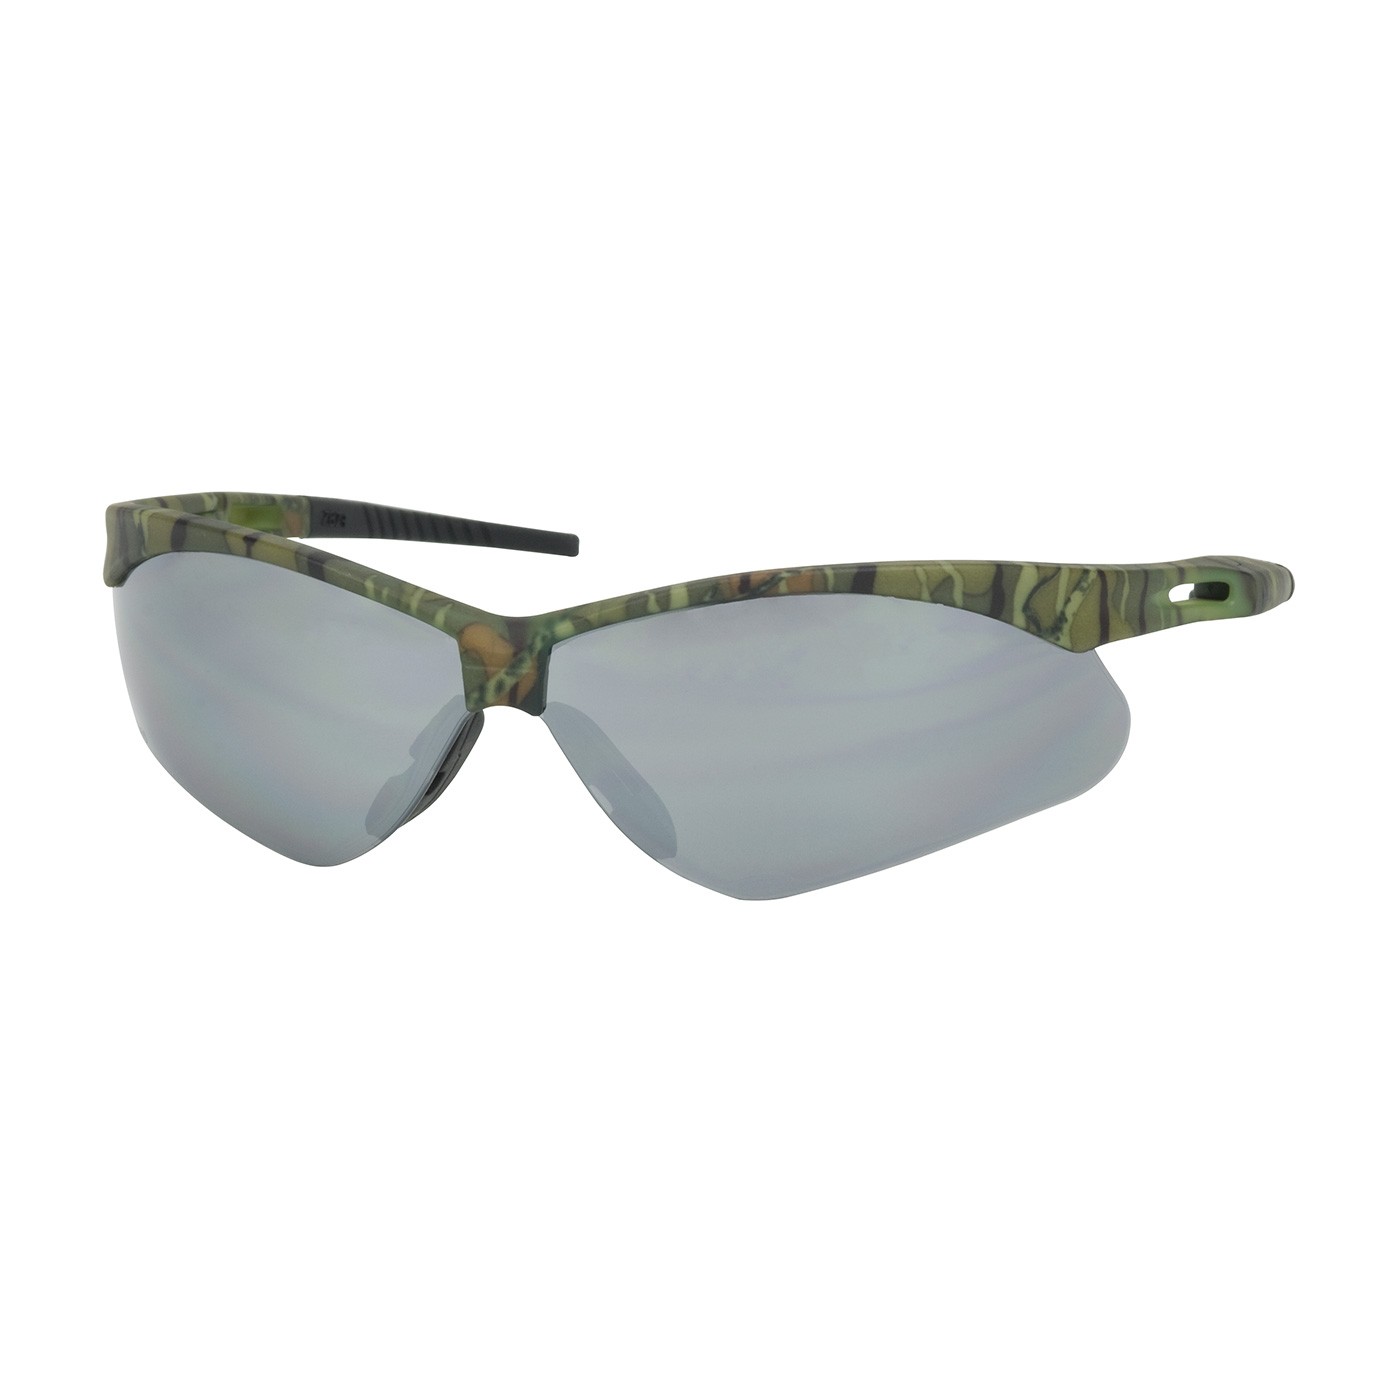 Anser™ Semi-Rimless Safety Glasses with Camouflage Frame, Silver Mirror Lens and Anti-Scratch Coating  (#250-AN-10128)